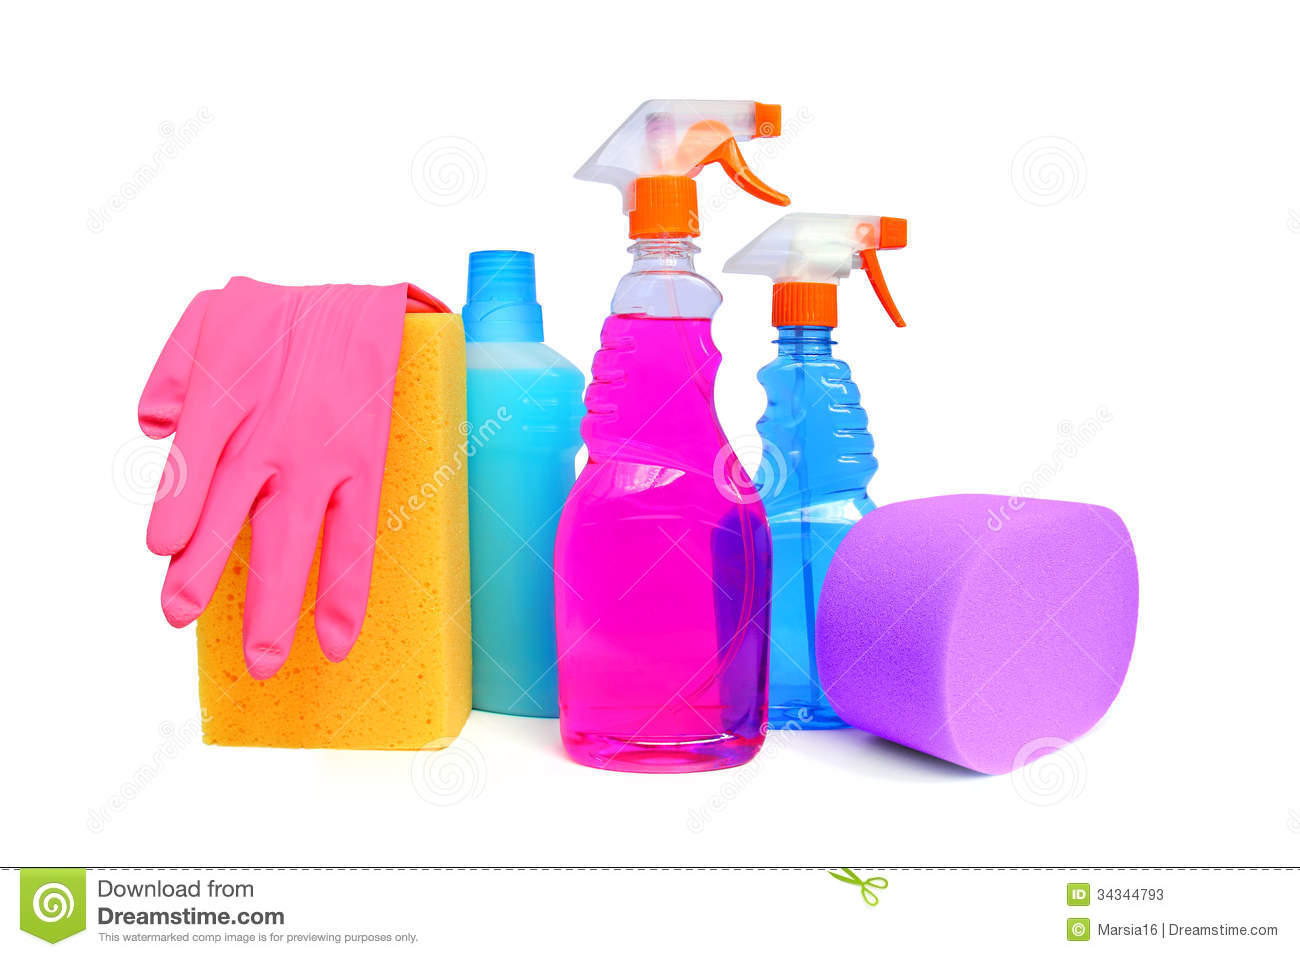 Cleaning Supplies On White Background Including Several Spray Bottles    